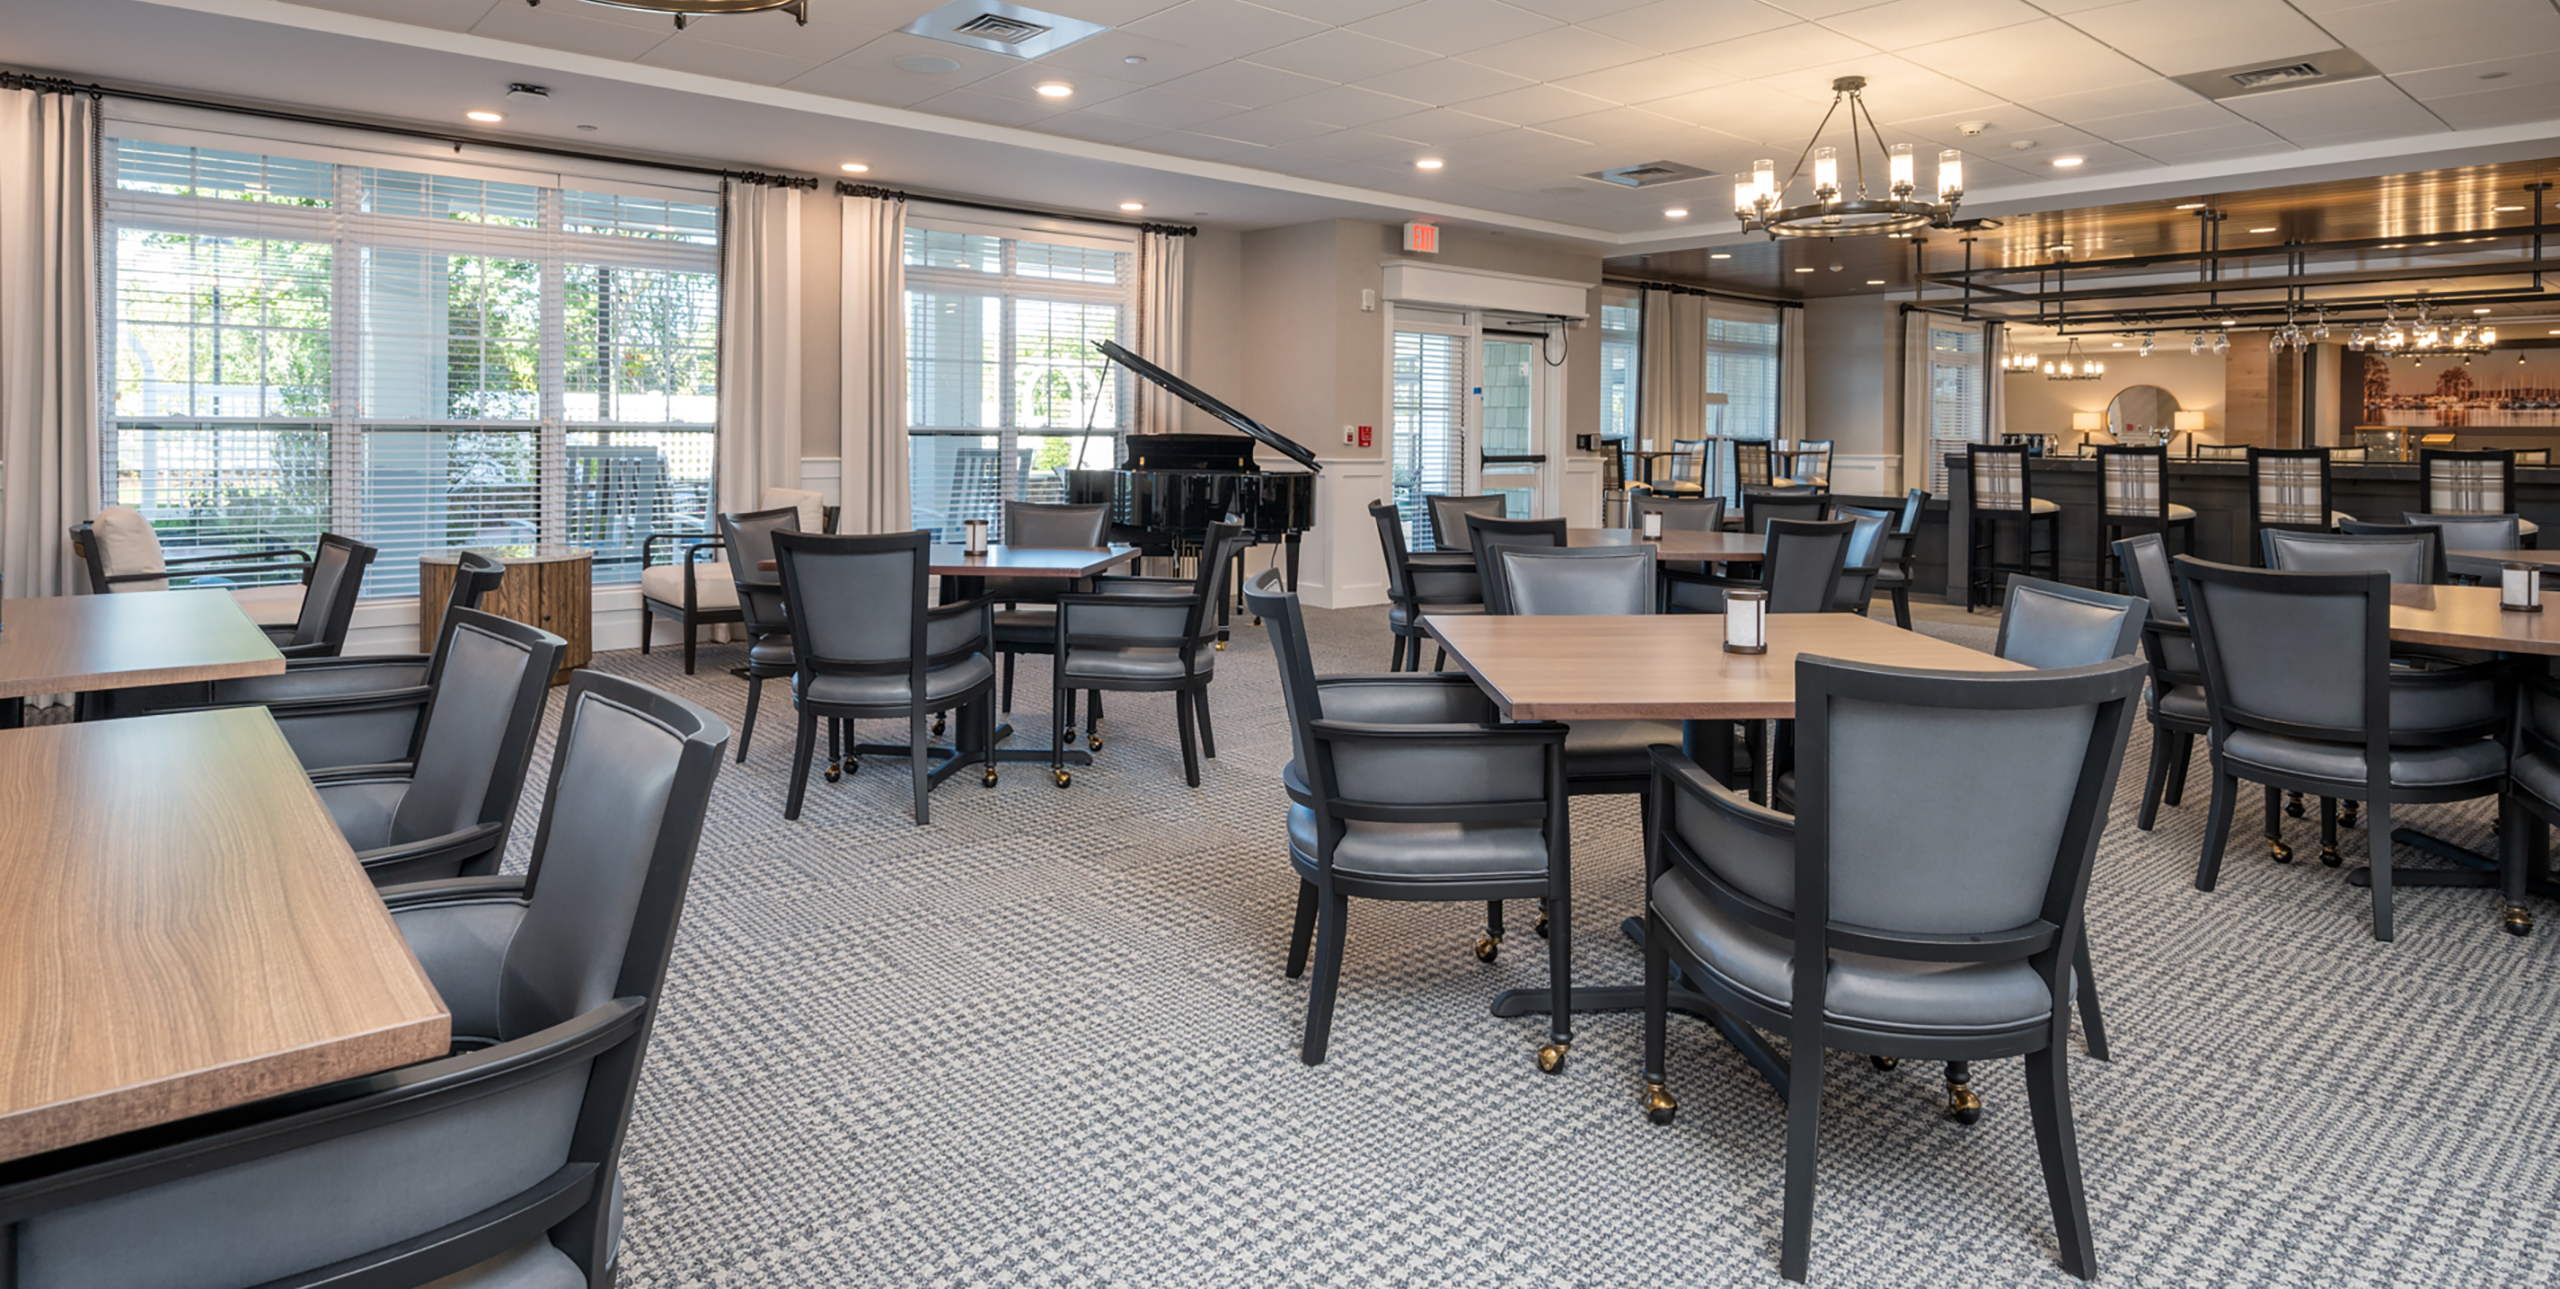 Dining room area with a grand piano at Brightview Senior Living Port Jeff